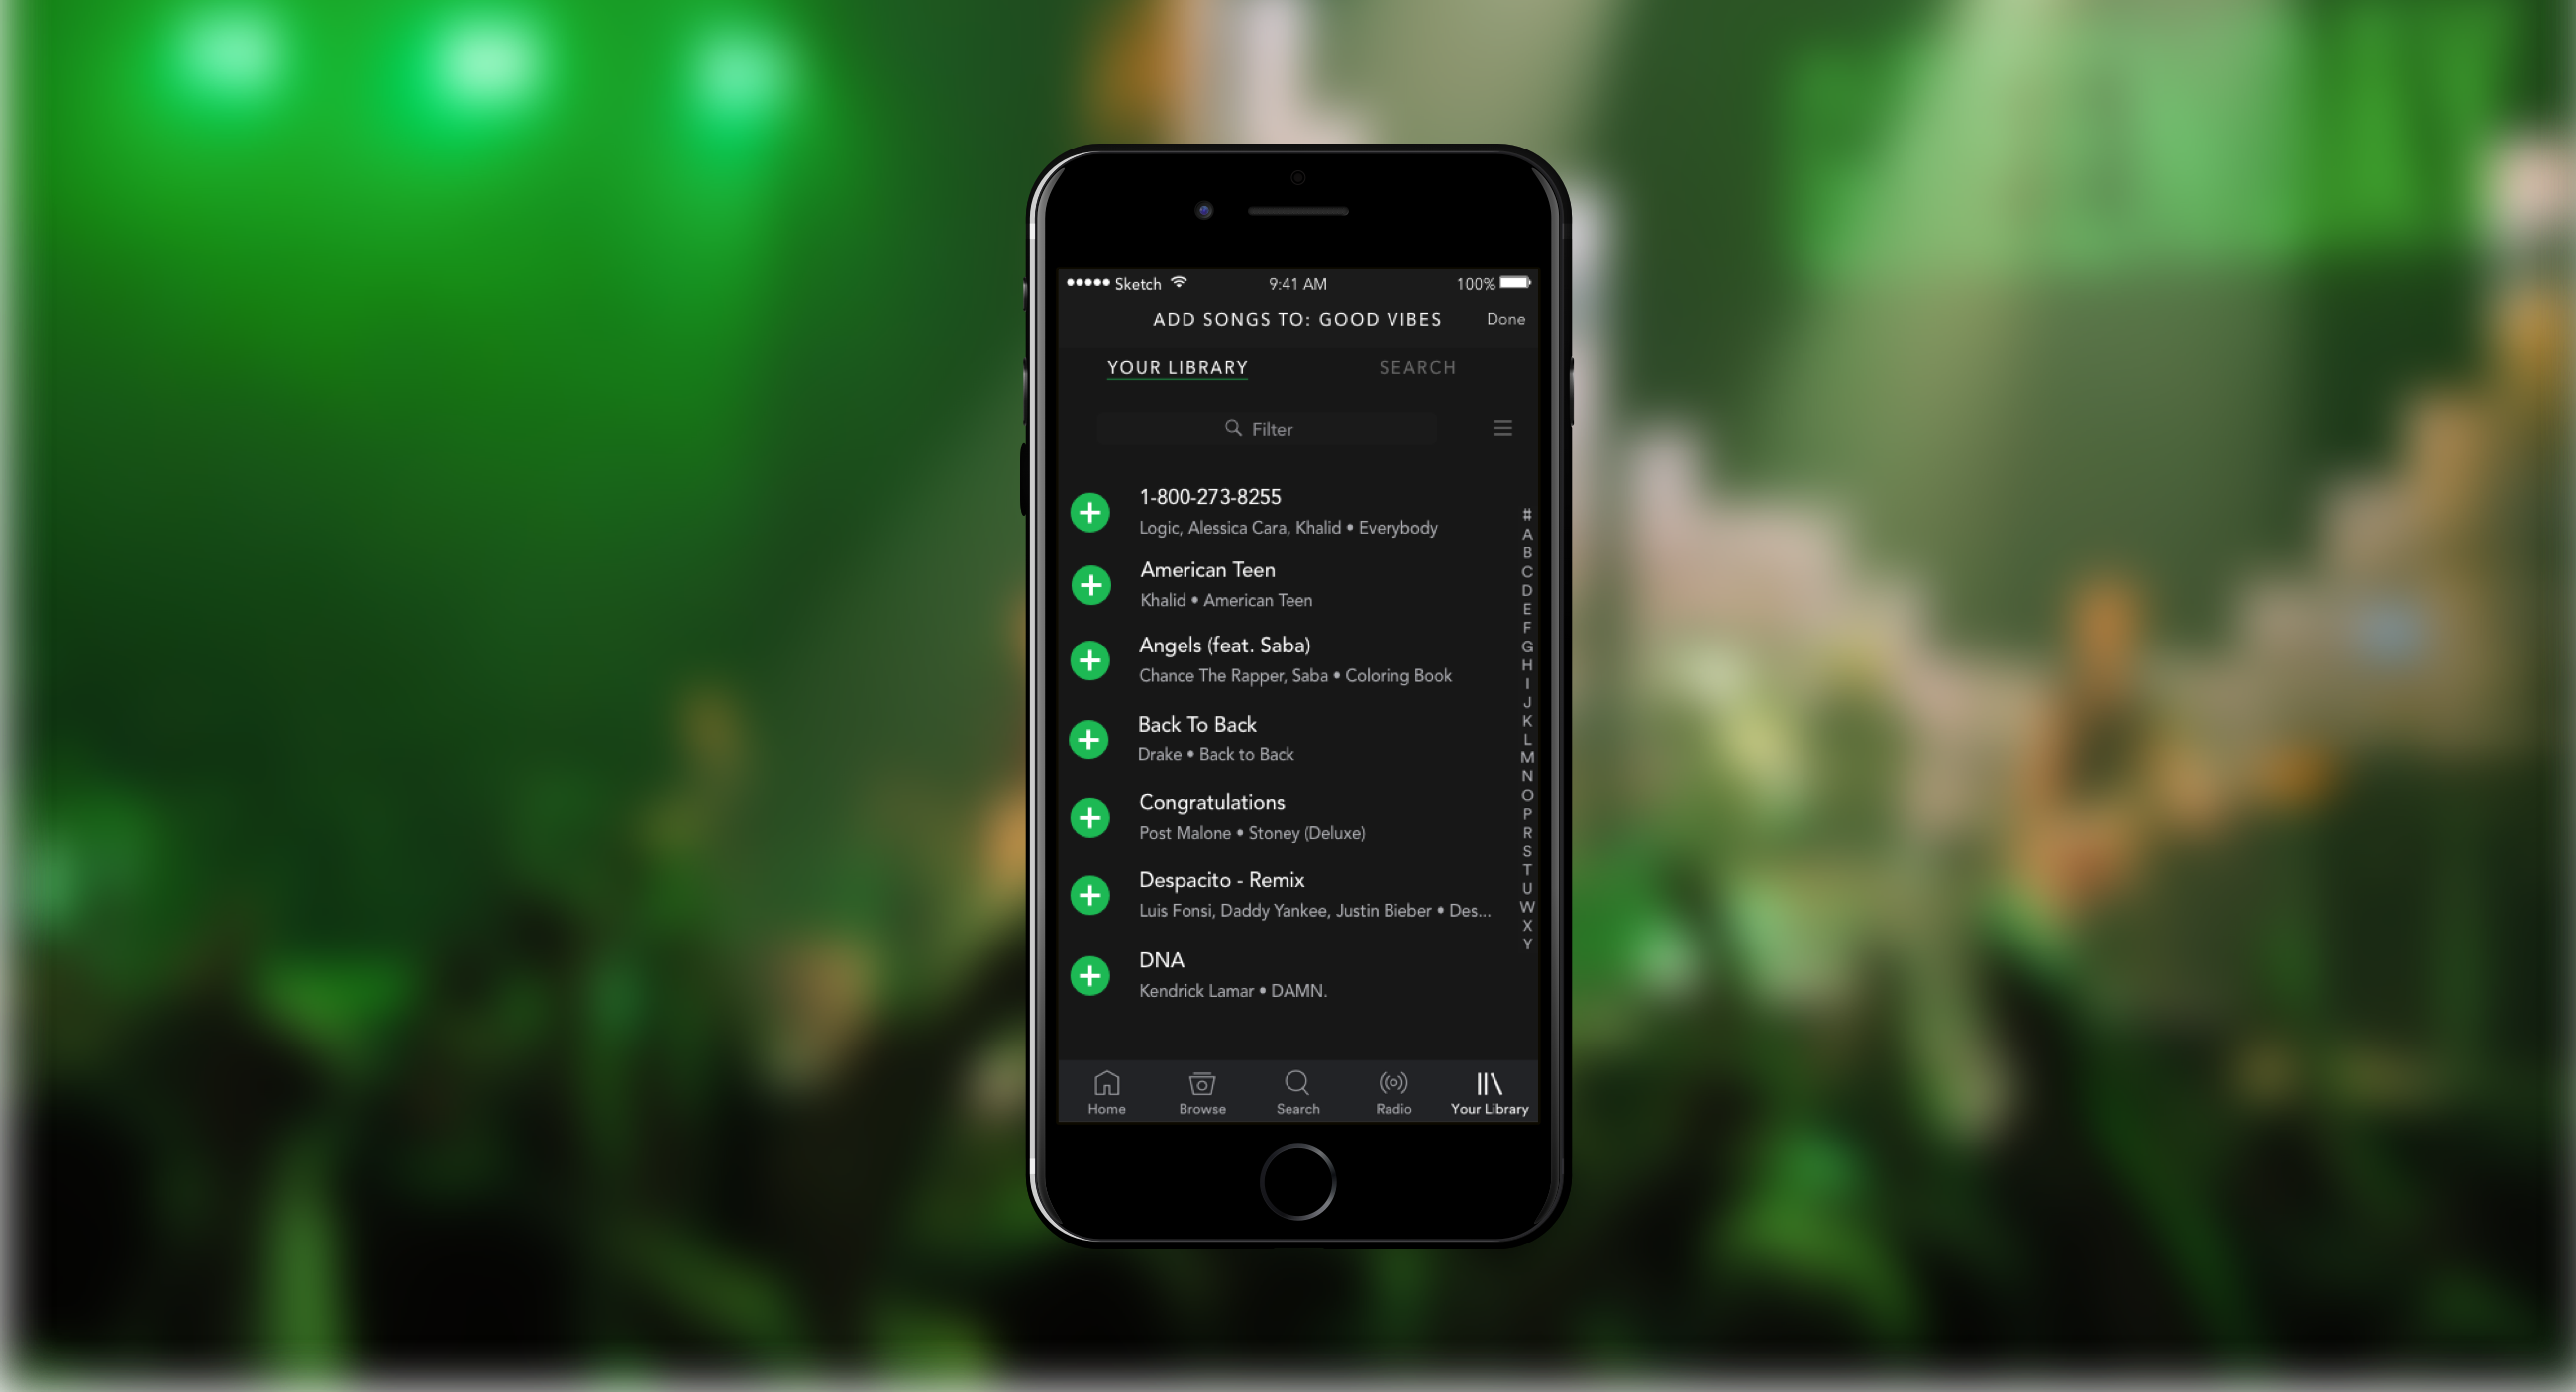 Redesigning The Playlist Creation Process on Spotify  by Fawzi Ammache  UX Planet